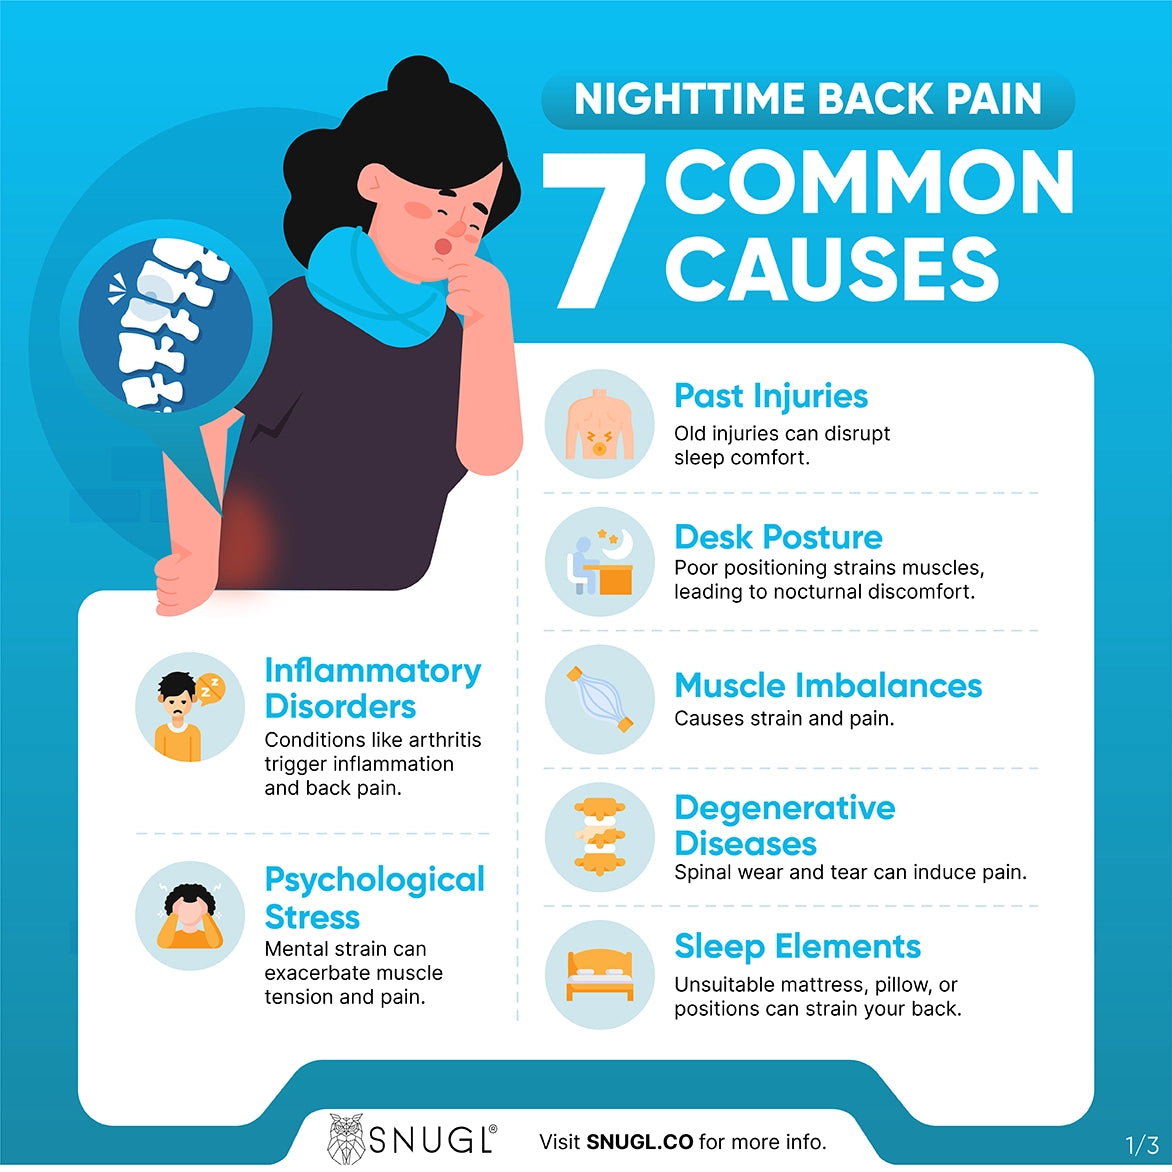 A summary infographic of causes of back pain at night that help show why it's a red flag.